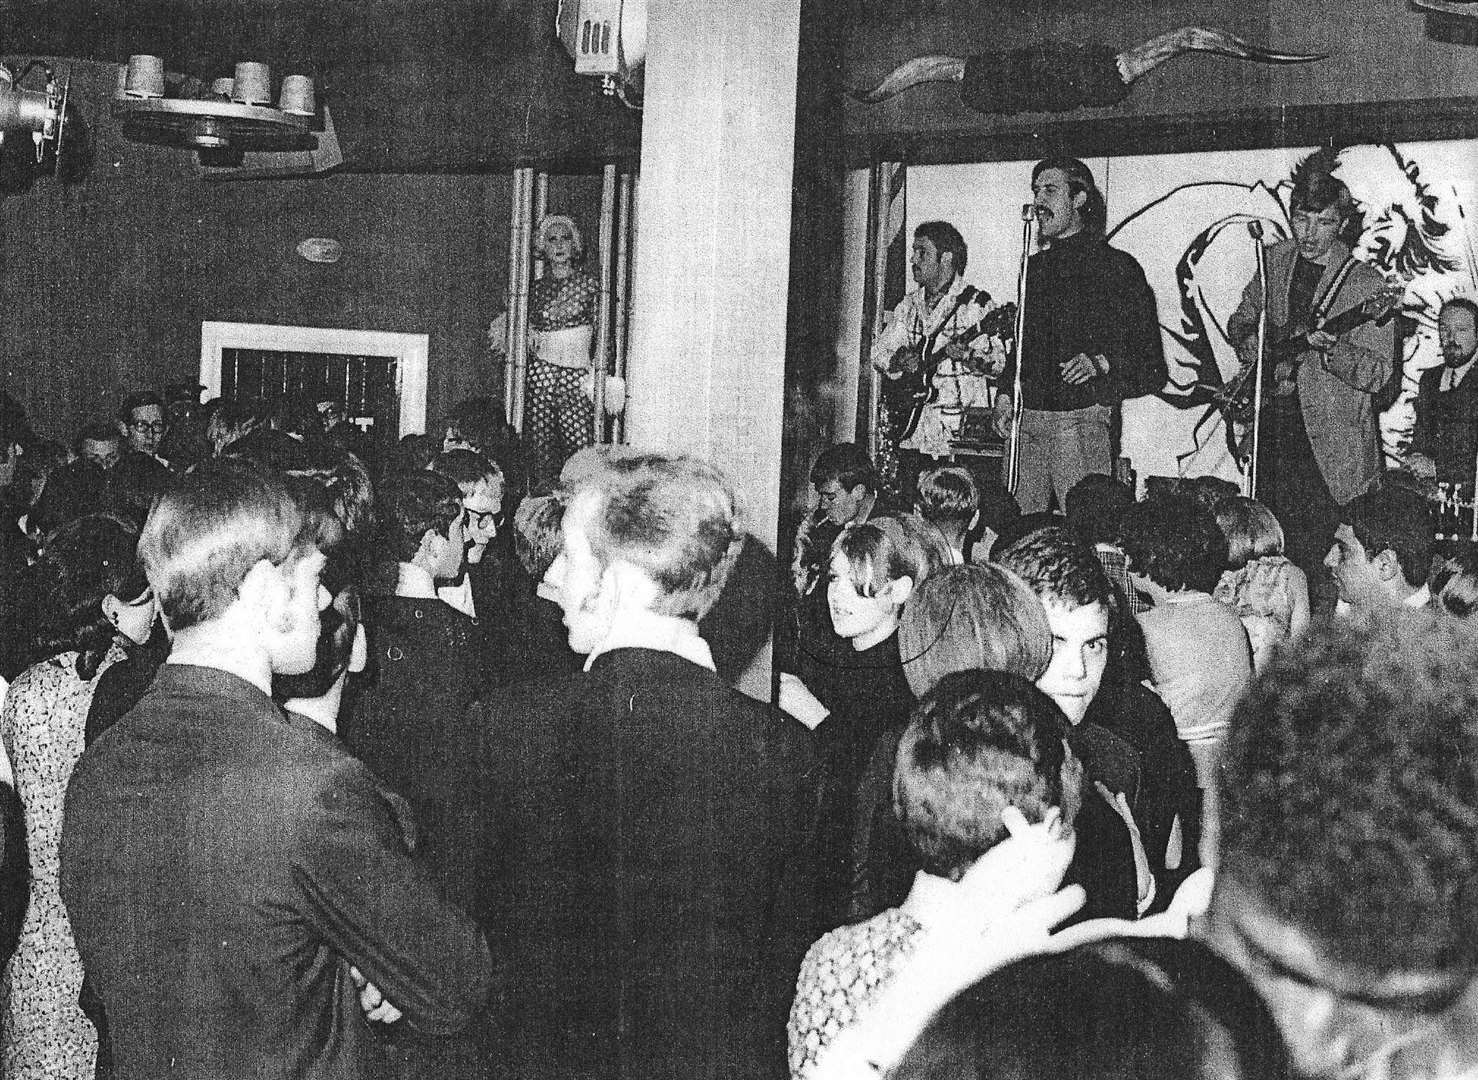 Opening night at The G-Ranch in Rose Yard, Maidstone, in 1967. It was the town's first club intended specifically for teenagers and was labelled Maidstone’s home of ska and reggae